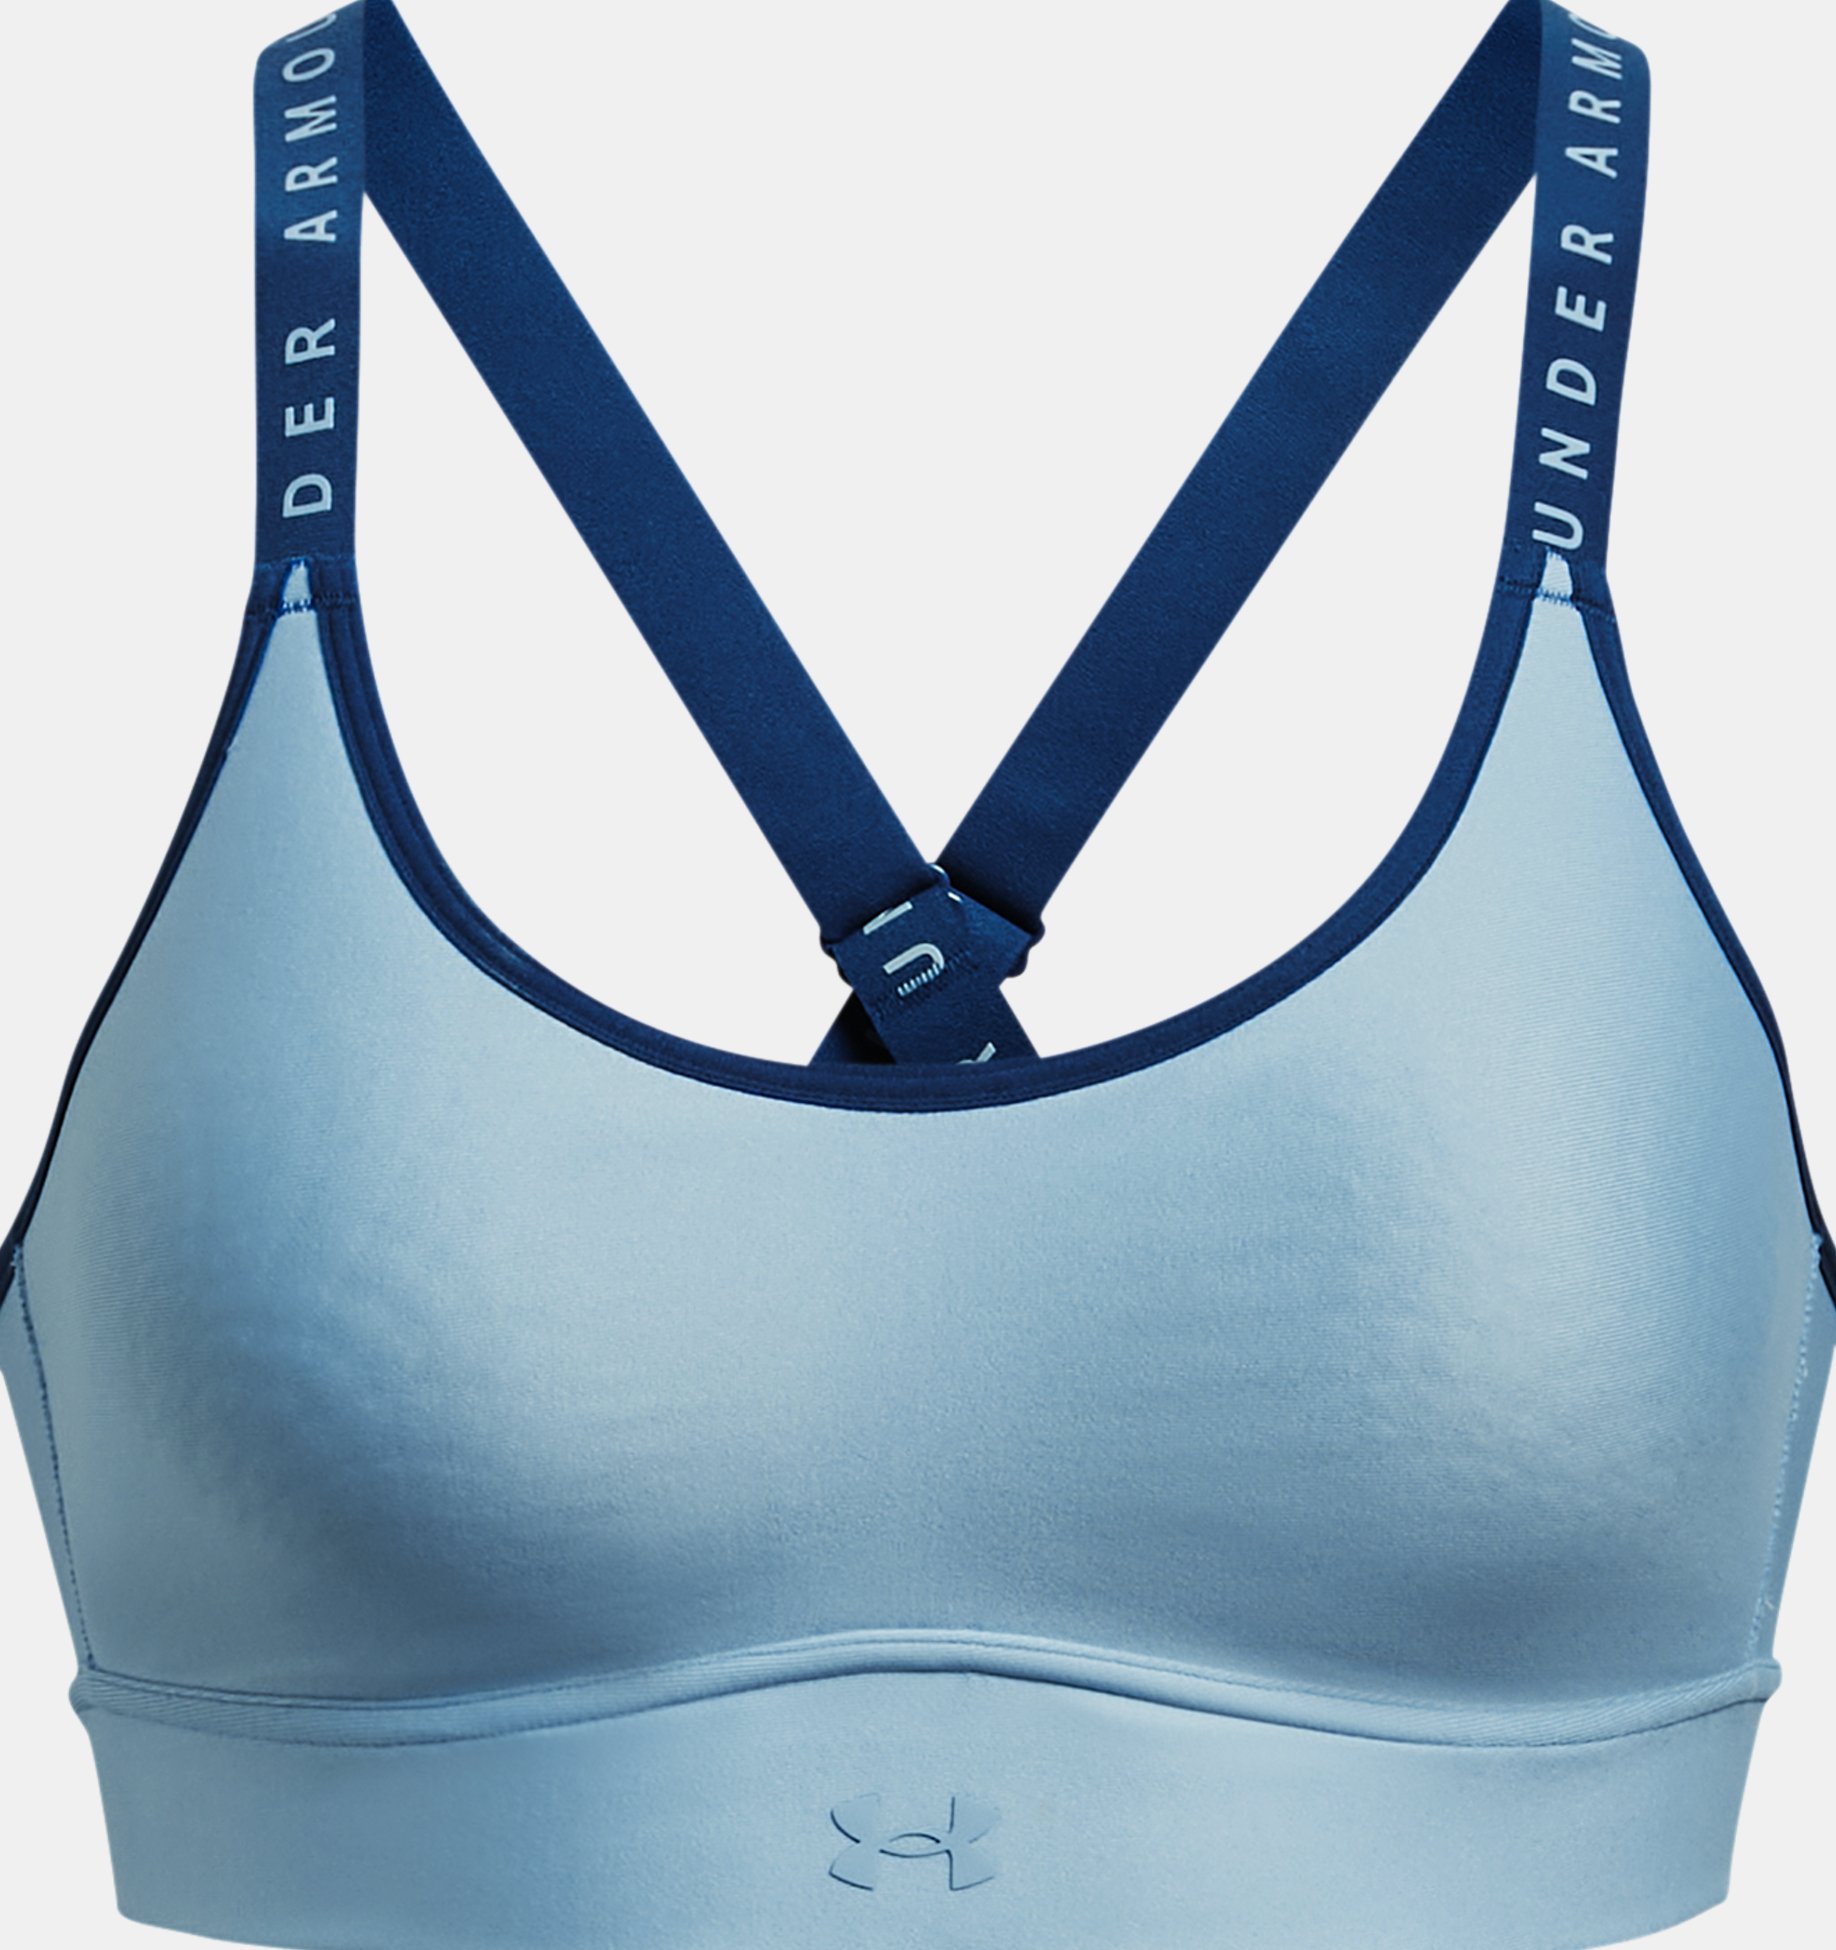 Under Armour Women's Infinity Mid Covered Sports Bra